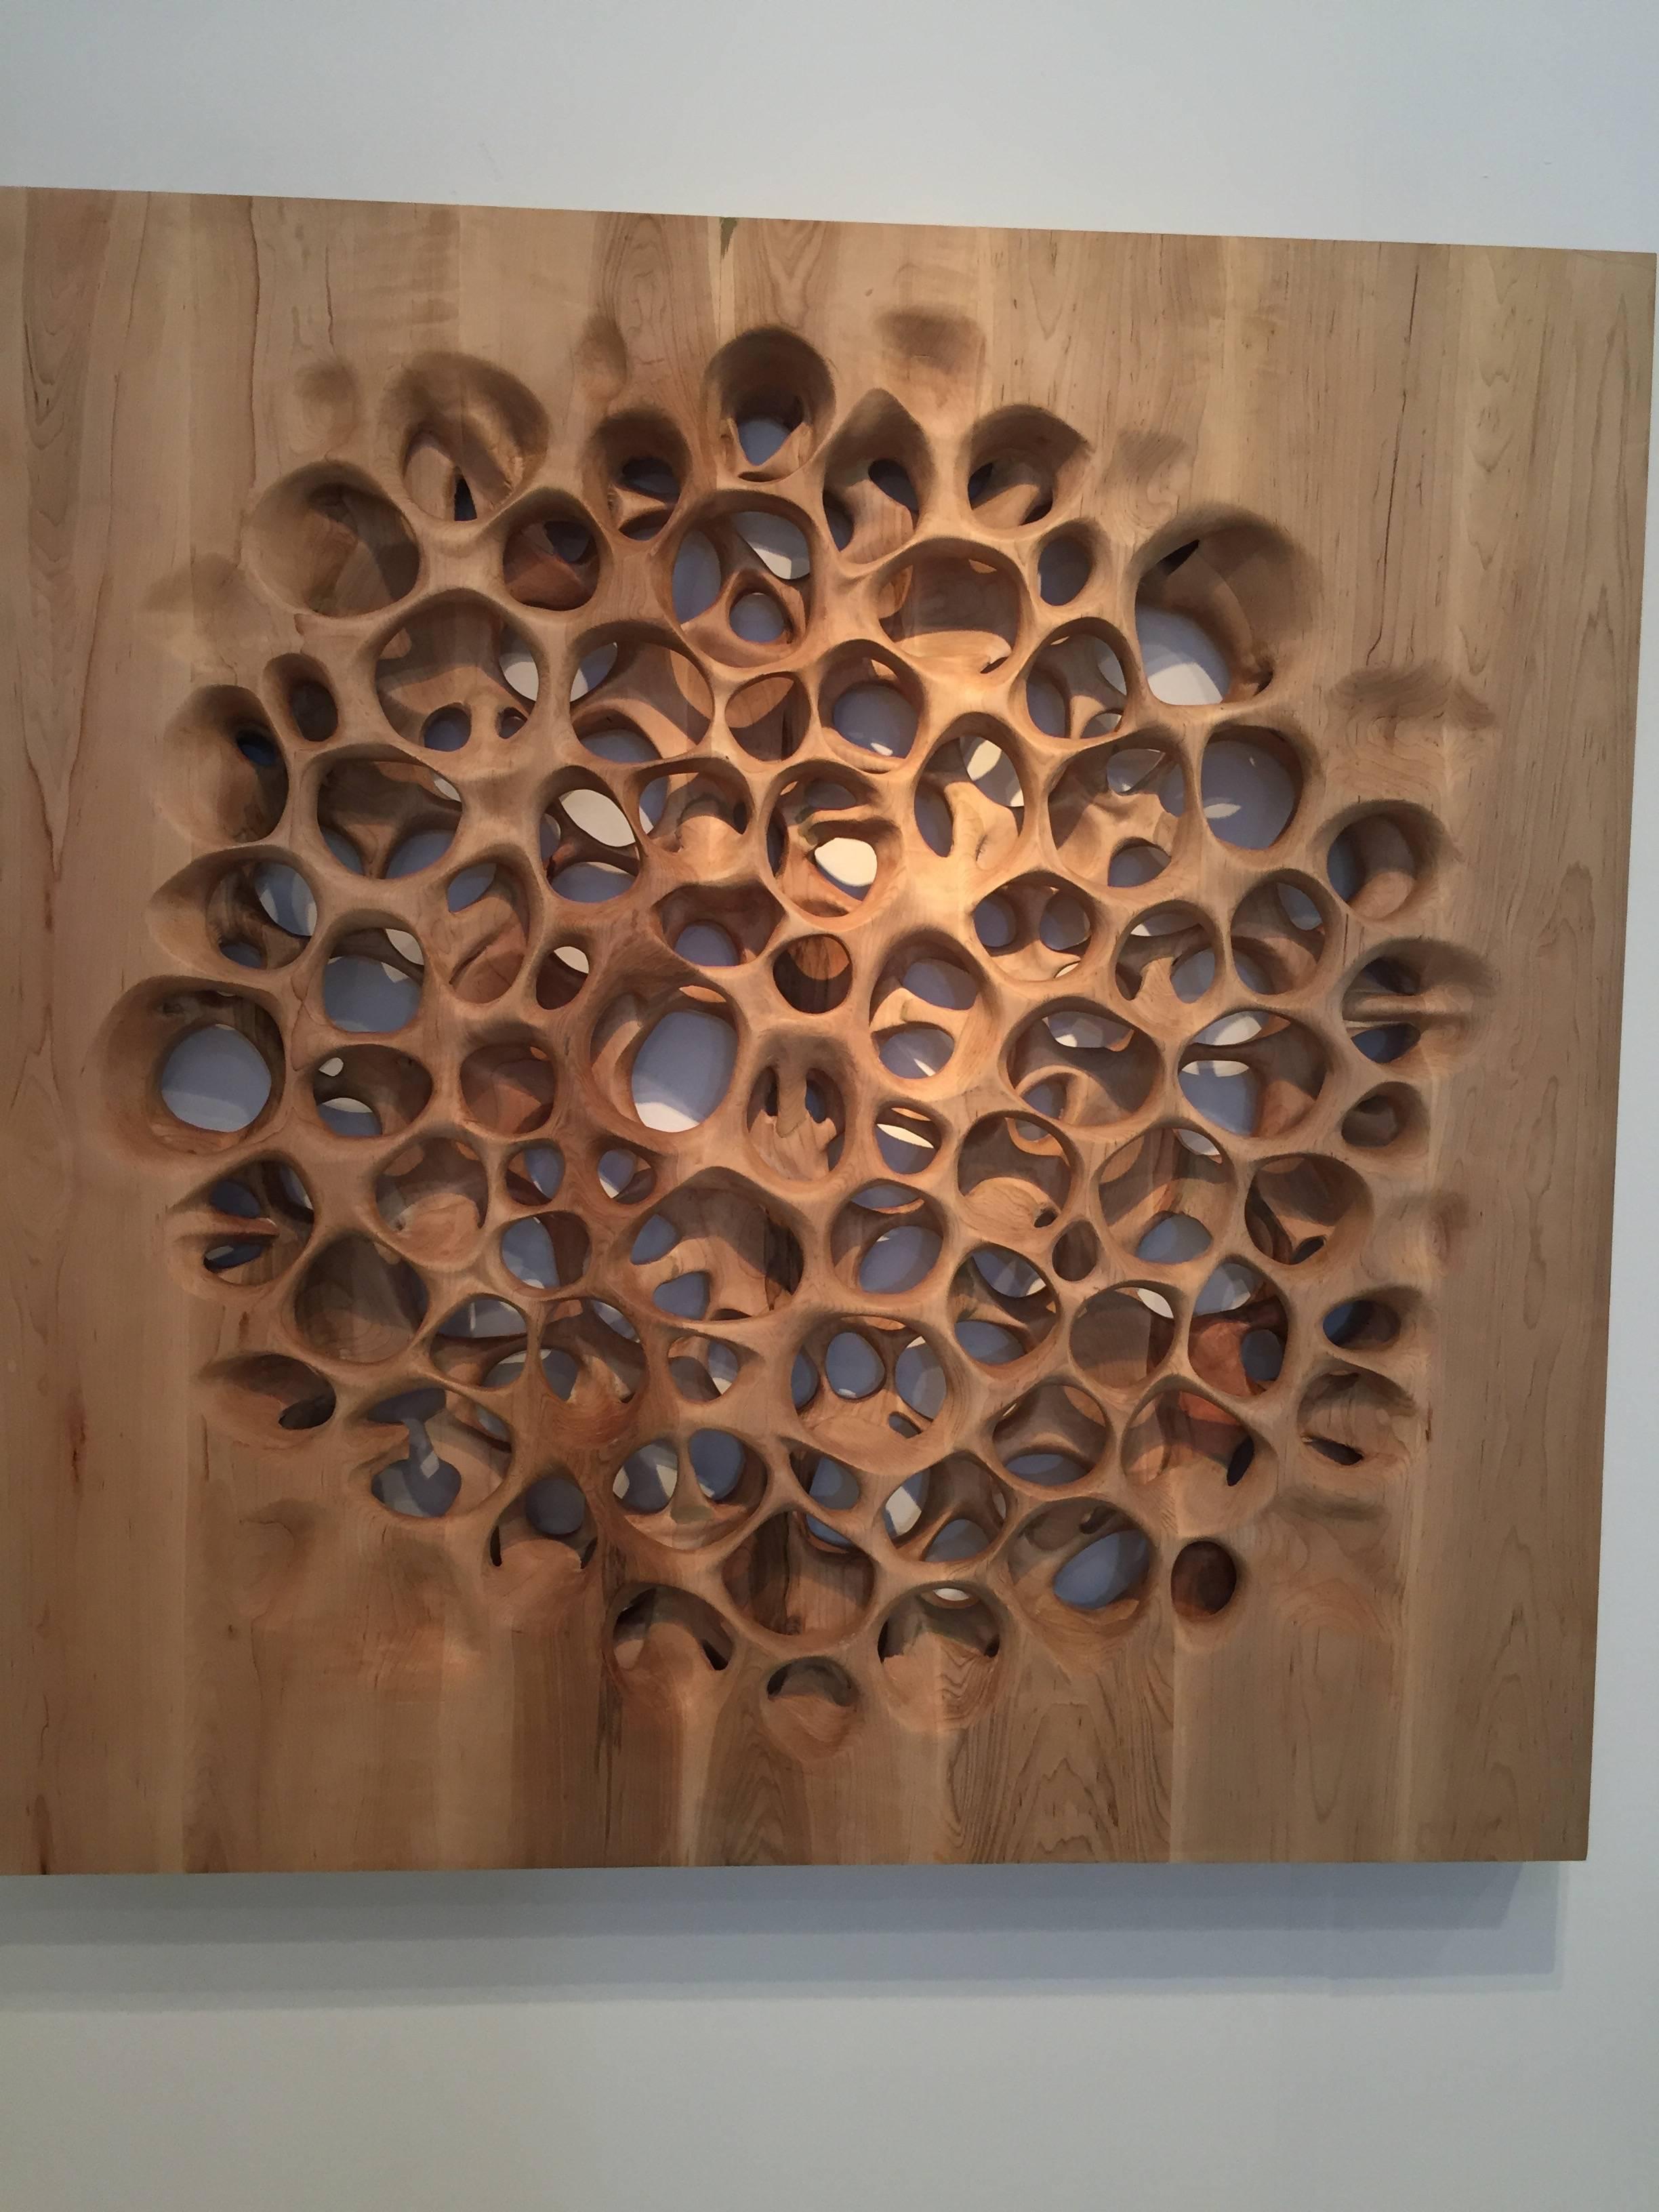 Loop is a custom wall panel made from solid maple wood. Loop is made from two different layers of carved pattern laminated together. 

The pattern and design can be customized based on your requirements. Amorph provides shop drawings for